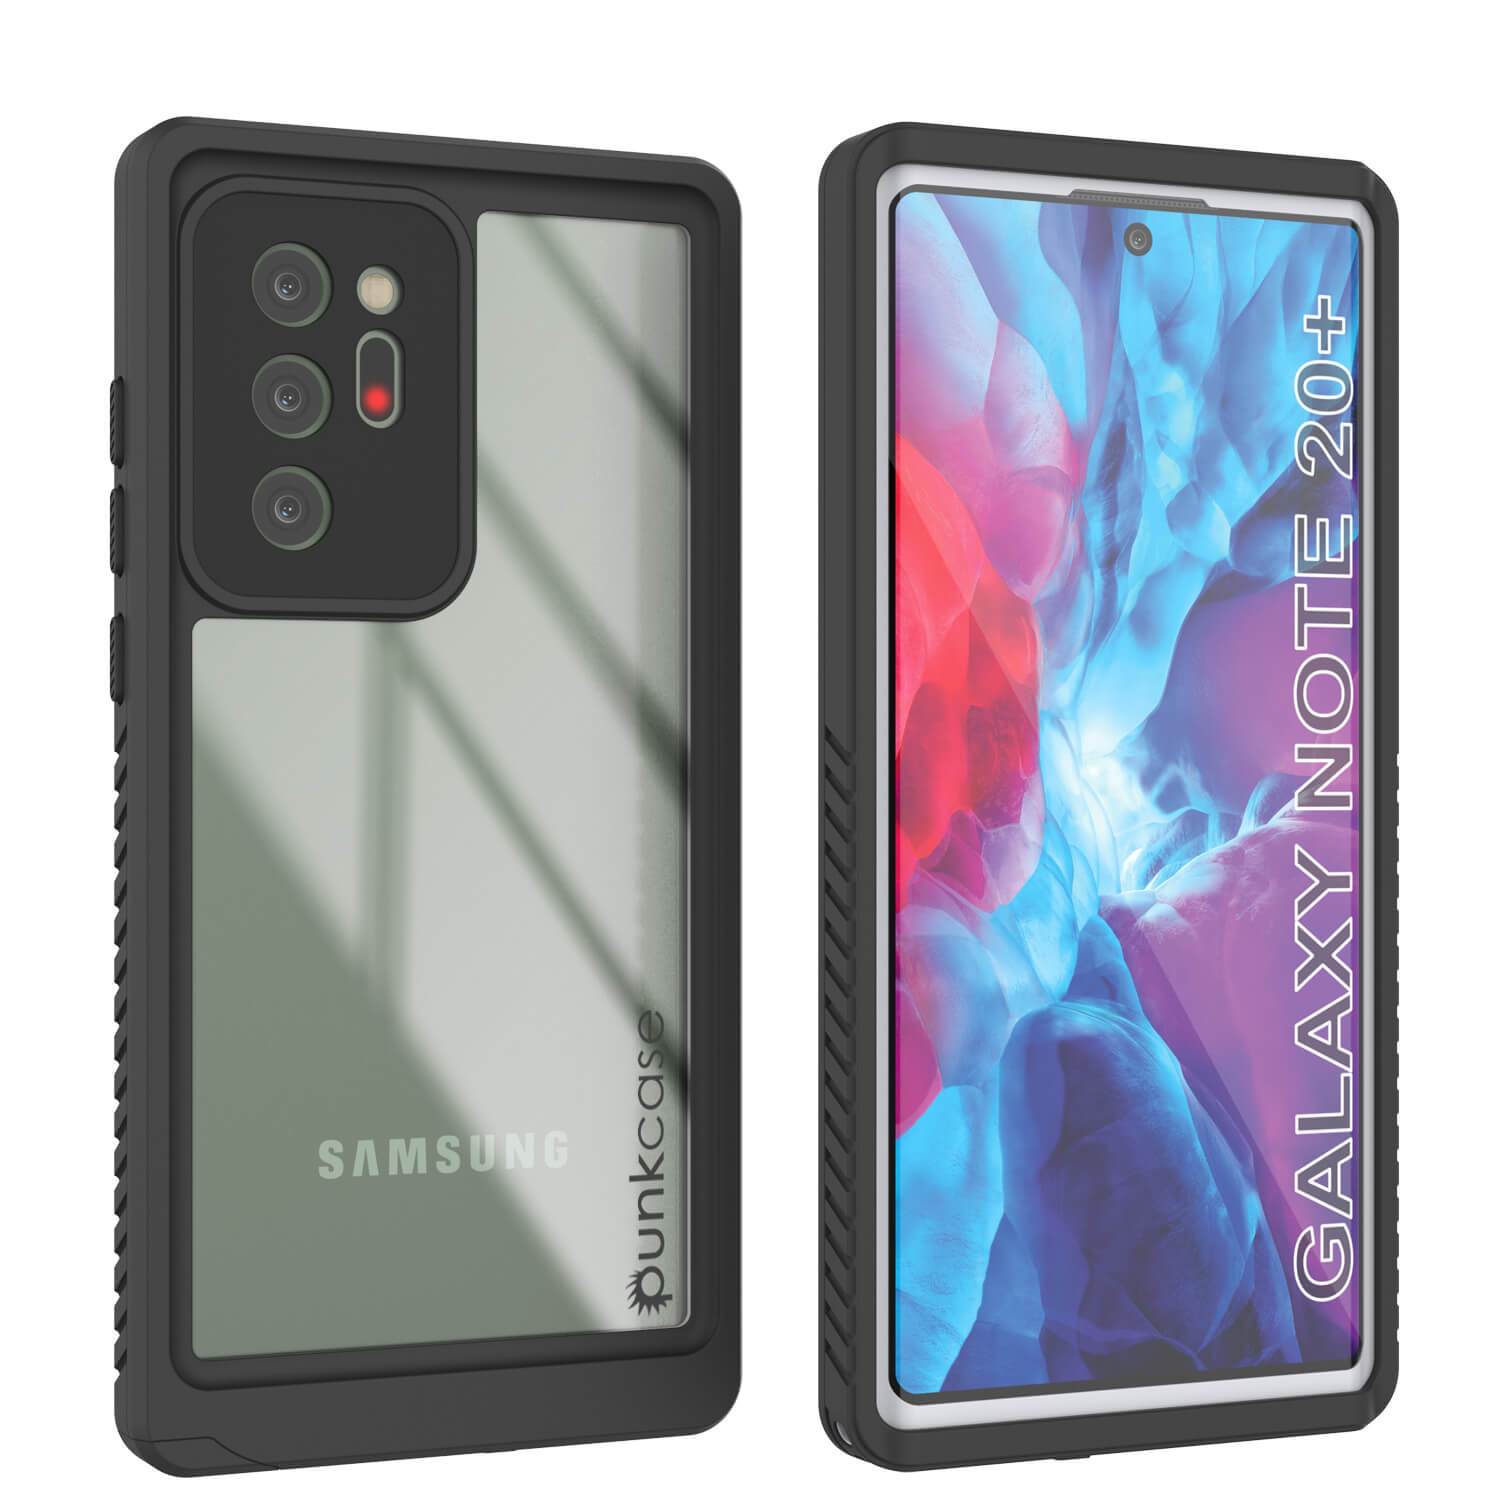 Galaxy Note 20 Ultra Case, Punkcase [Extreme Series] Armor Cover W/ Built In Screen Protector [White]